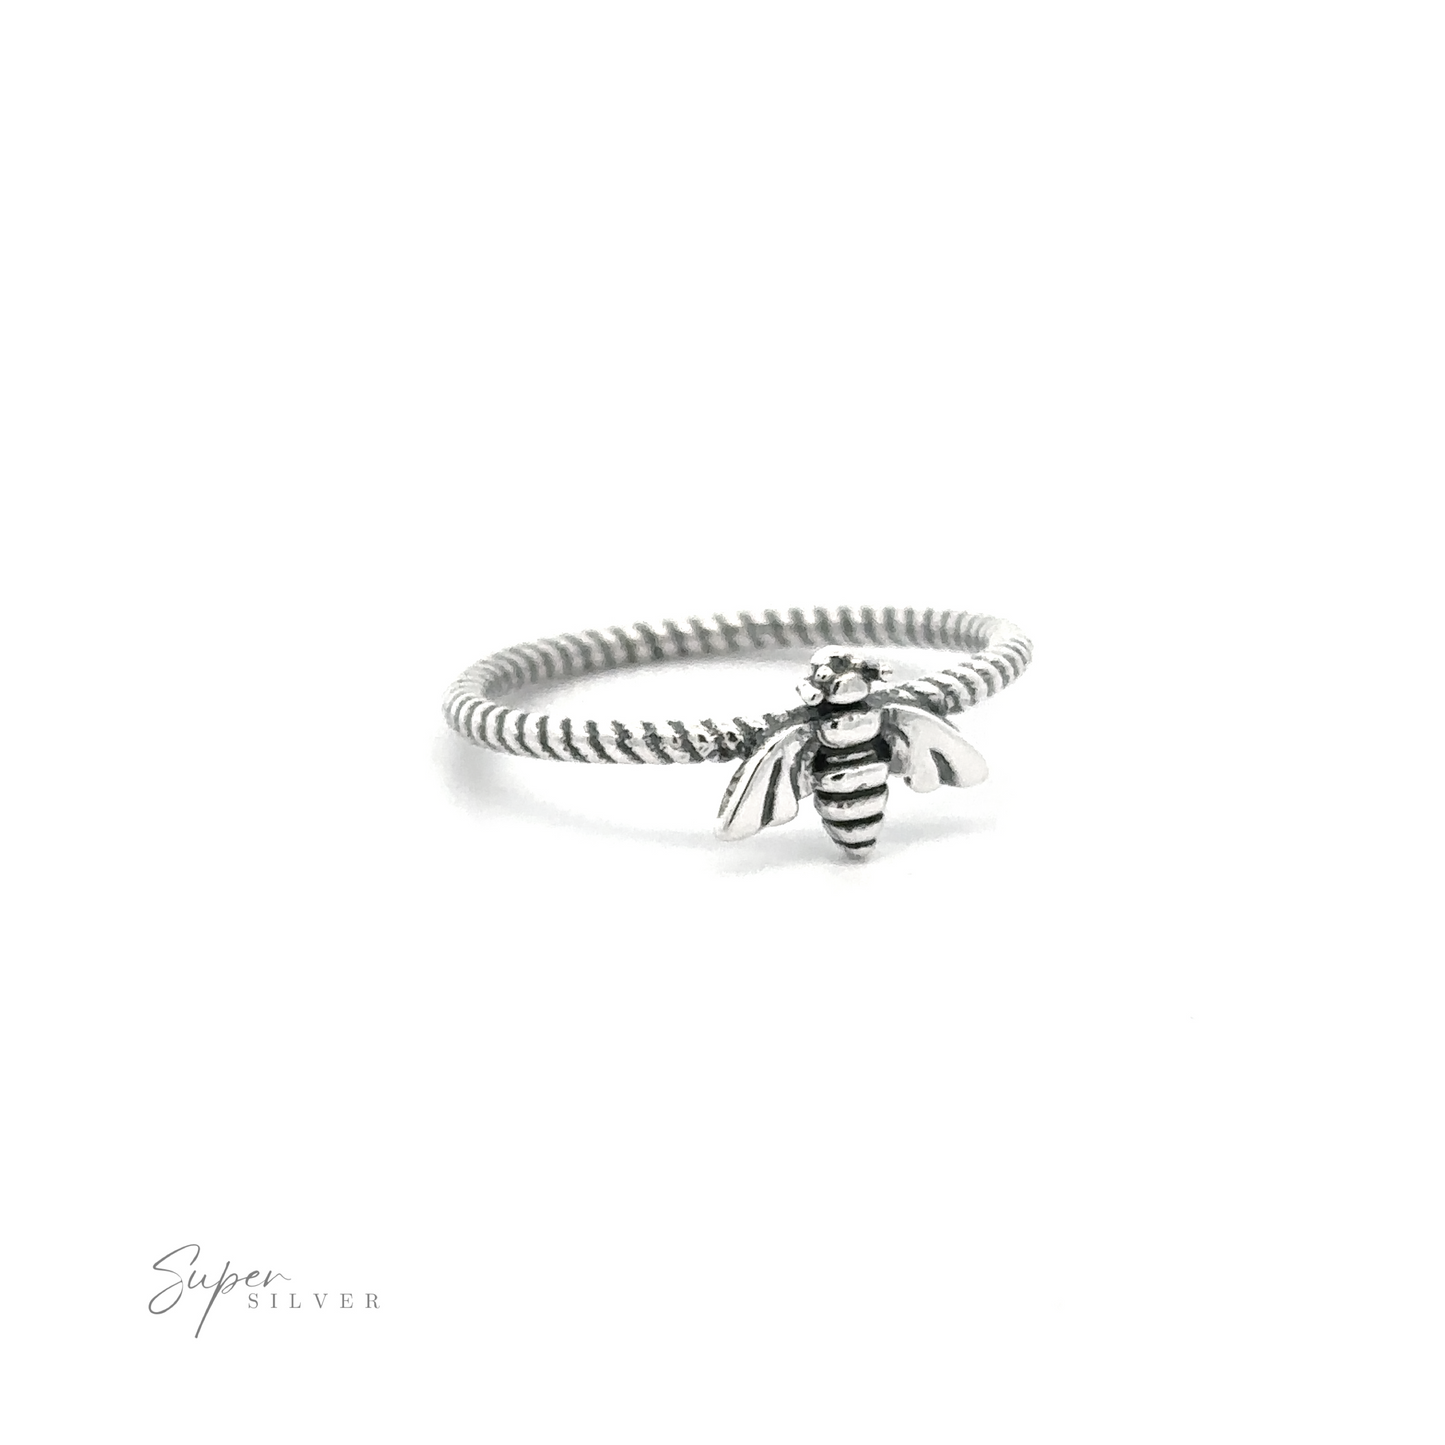 A Bee Ring with Twisted Band, made of 925 sterling silver and featuring a patina finish.